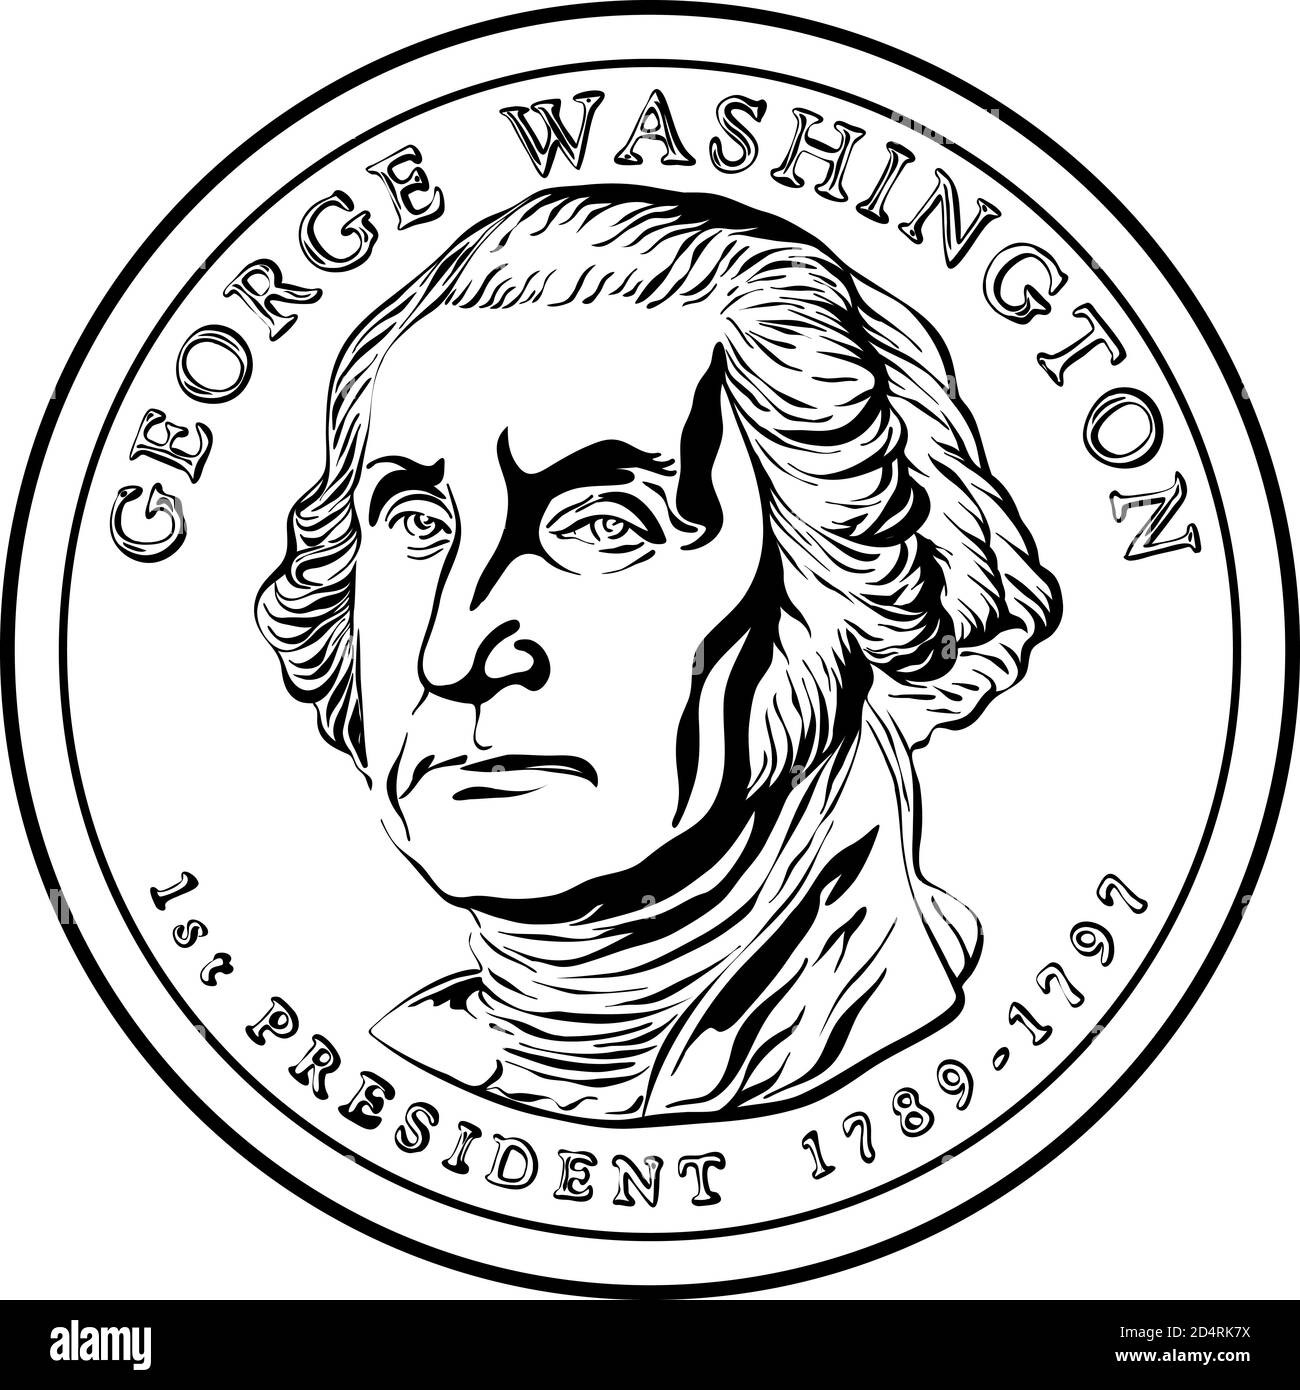 American money Presidential dollar coin, with first president of the United States Washington on obverse. Black and white image Stock Vector